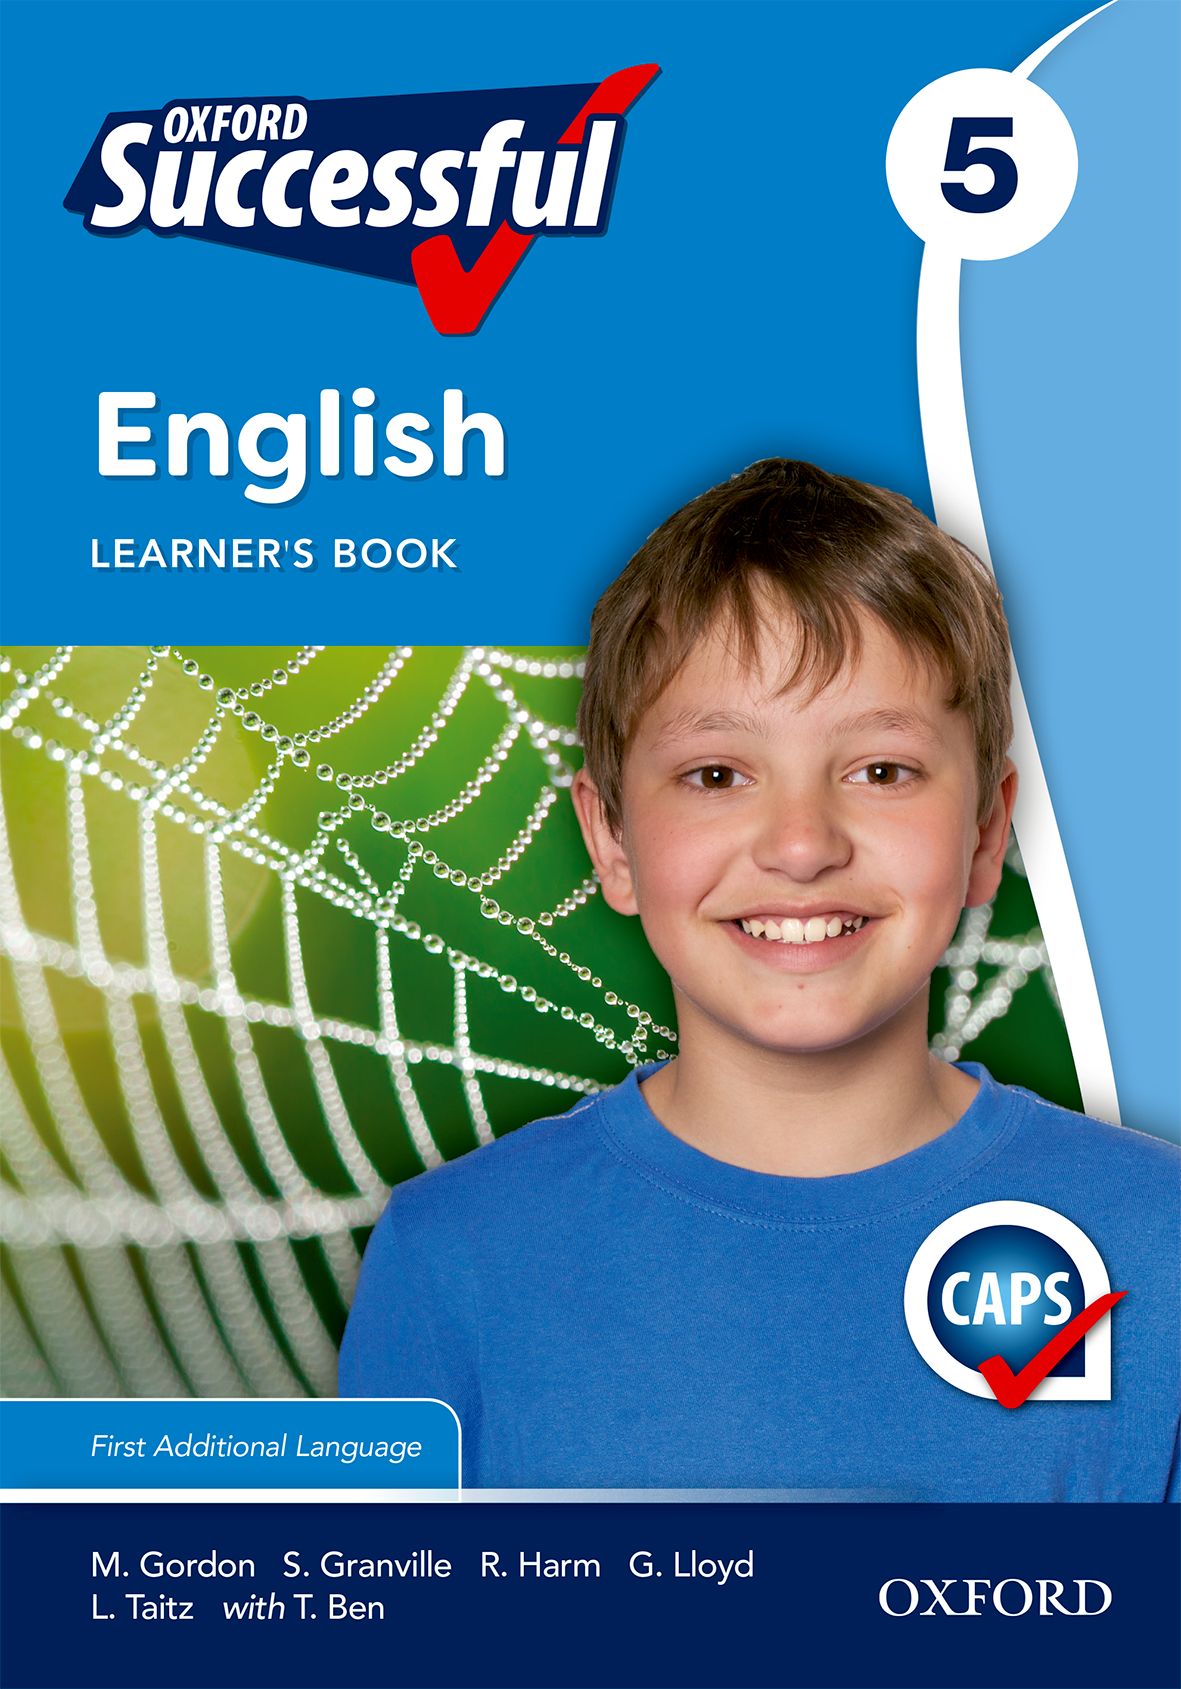 Oxford Successful English First Additional Language Grade 5 Learner's